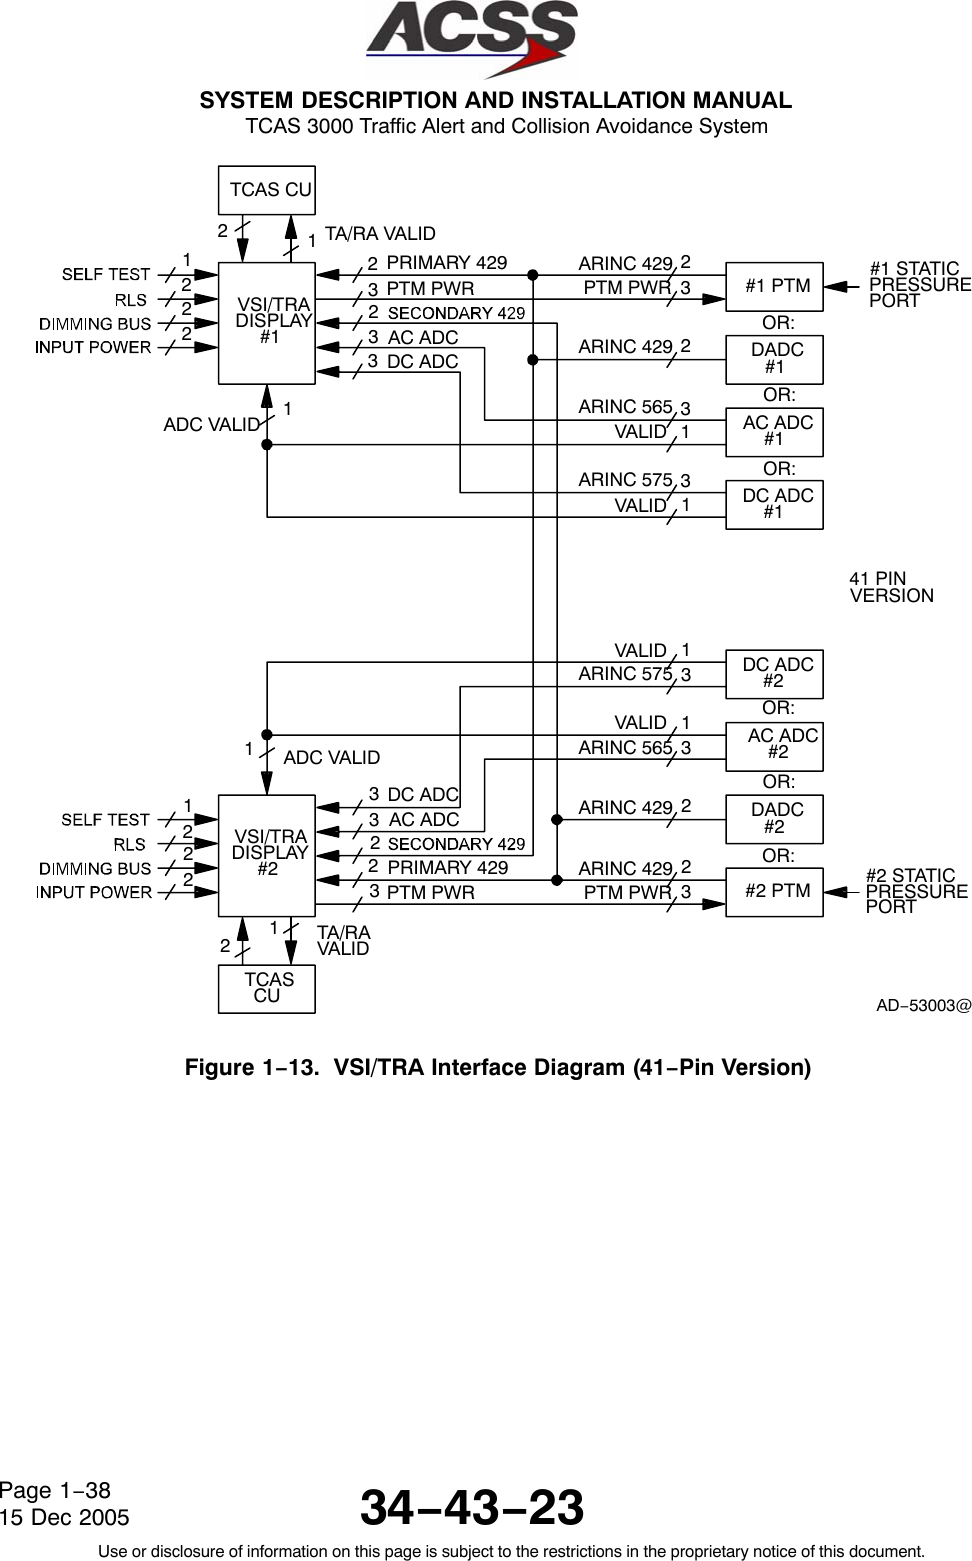  SYSTEM DESCRIPTION AND INSTALLATION MANUAL TCAS 3000 Traffic Alert and Collision Avoidance System34−43−23Use or disclosure of information on this page is subject to the restrictions in the proprietary notice of this document.Page 1−3815 Dec 2005TCAS CUVSI/TRADISPLAY#1VSI/TRADISPLAY#2TCASCU#1 PTMDC ADC#2AC ADC#2DADC#2#2 PTM12ADC VALIDTA/RAVALIDPRIMARY 429PTM PWRAC ADCDC ADCADC VALIDDC ADCAC ADCARINC 429PTM PWRARINC 429OR:ARINC 565VALIDVALIDOR:OR:41 PINVERSIONVALIDARINC 575VALIDARINC 565OR:OR:OR:ARINC 429PTM PWRAD−53003@PRIMARY 429PTM PWR222223311223311112333222112133223#1 STATICPRESSUREPORT#2 STATICPRESSUREPORT3TA/RA VALIDDC ADC#1AC ADC#1DADC#1ARINC 575 3ARINC 429 2Figure 1−13.  VSI/TRA Interface Diagram (41−Pin Version)